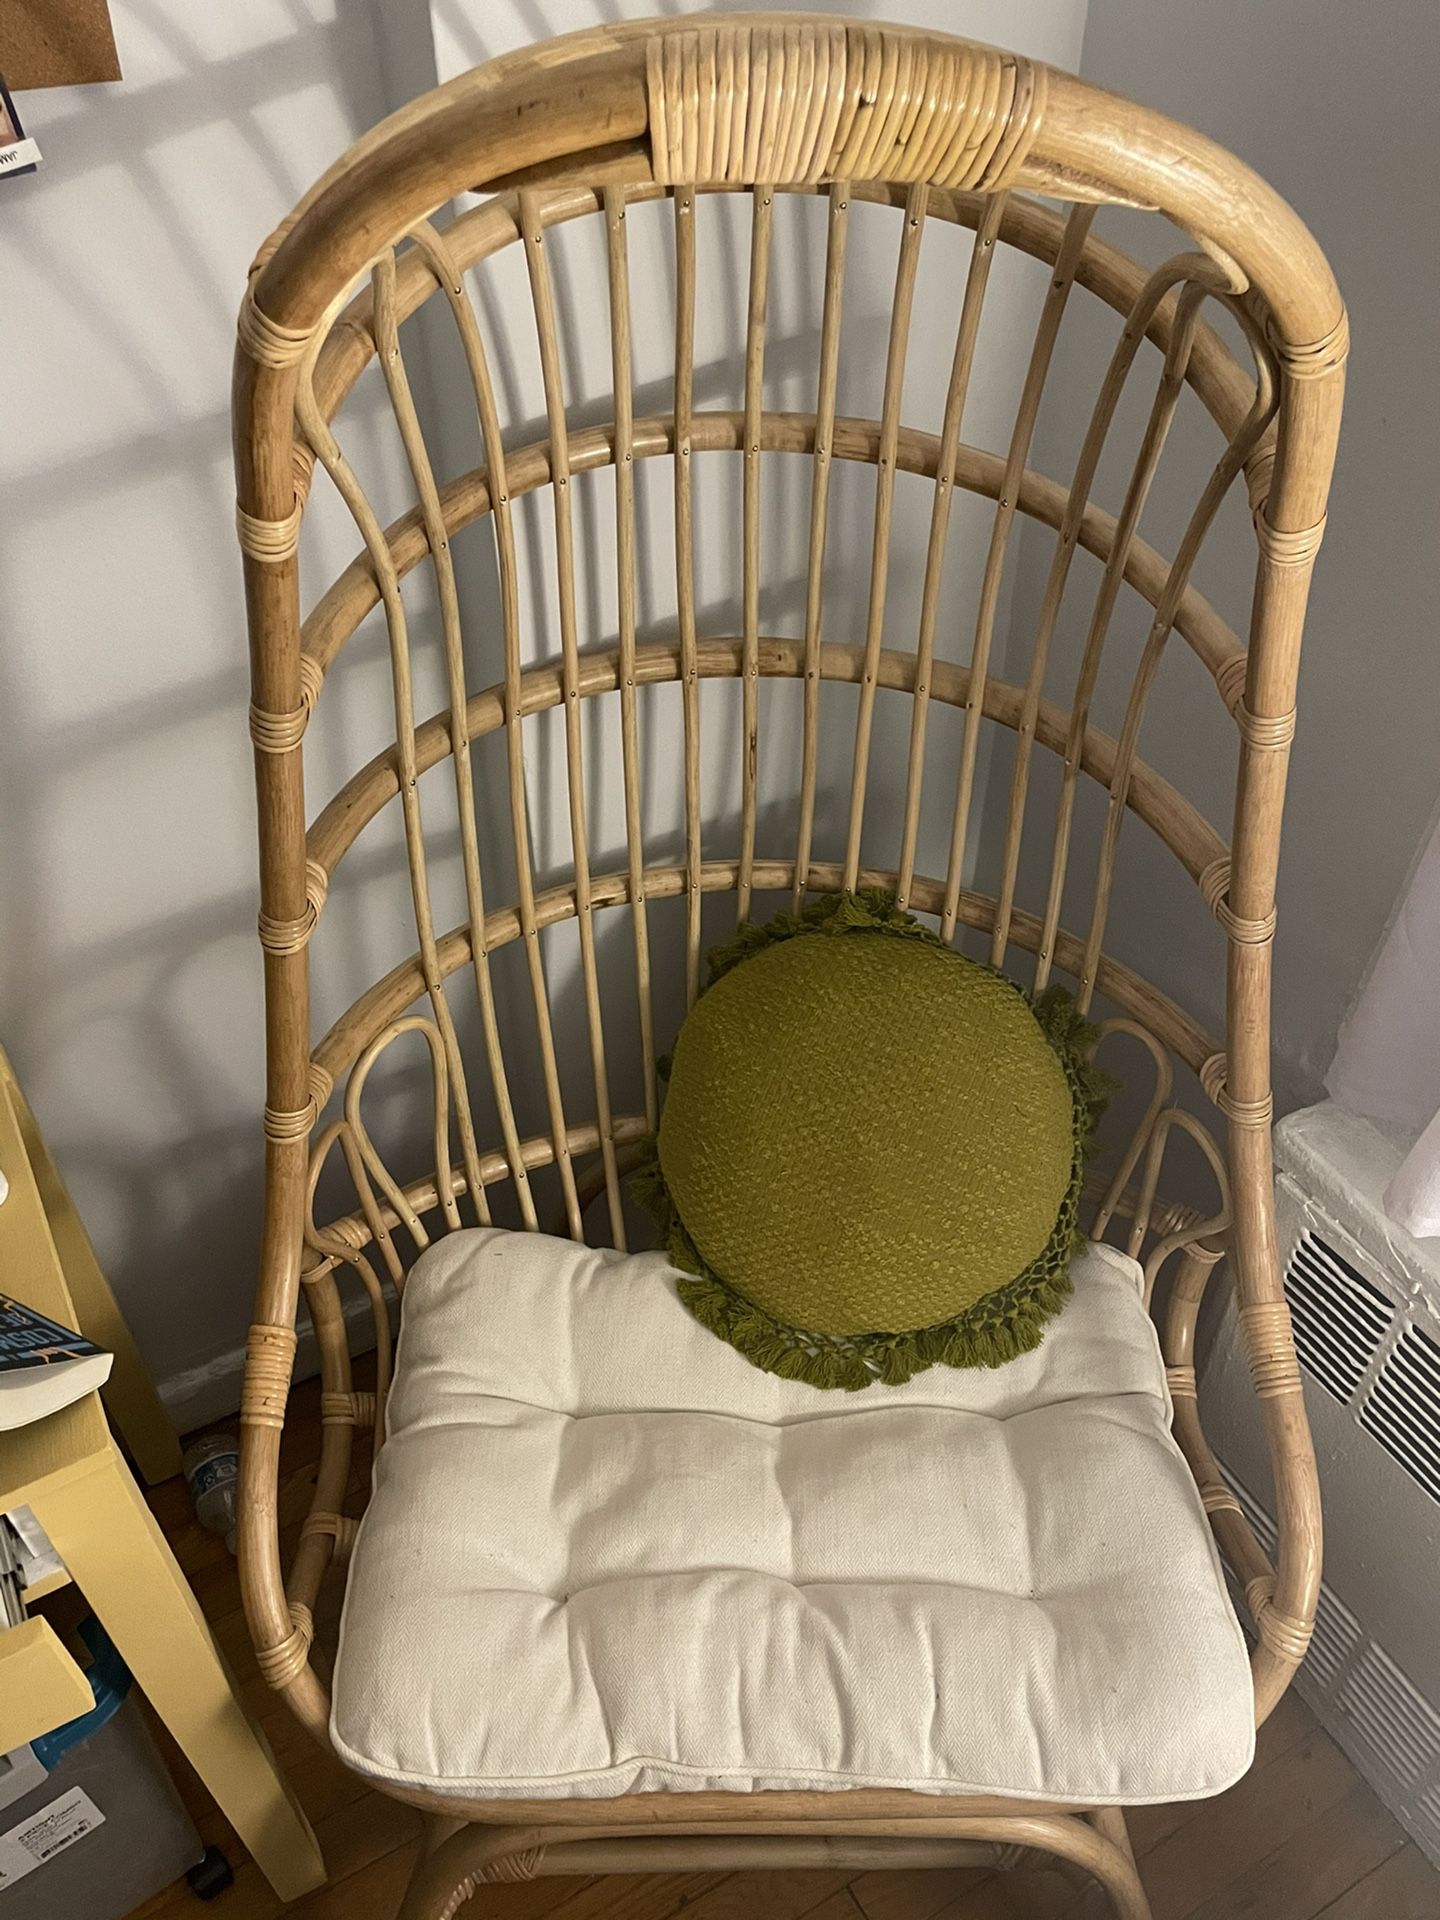 Rattan Cocoon Chair for Sale in Queens, NY - OfferUp